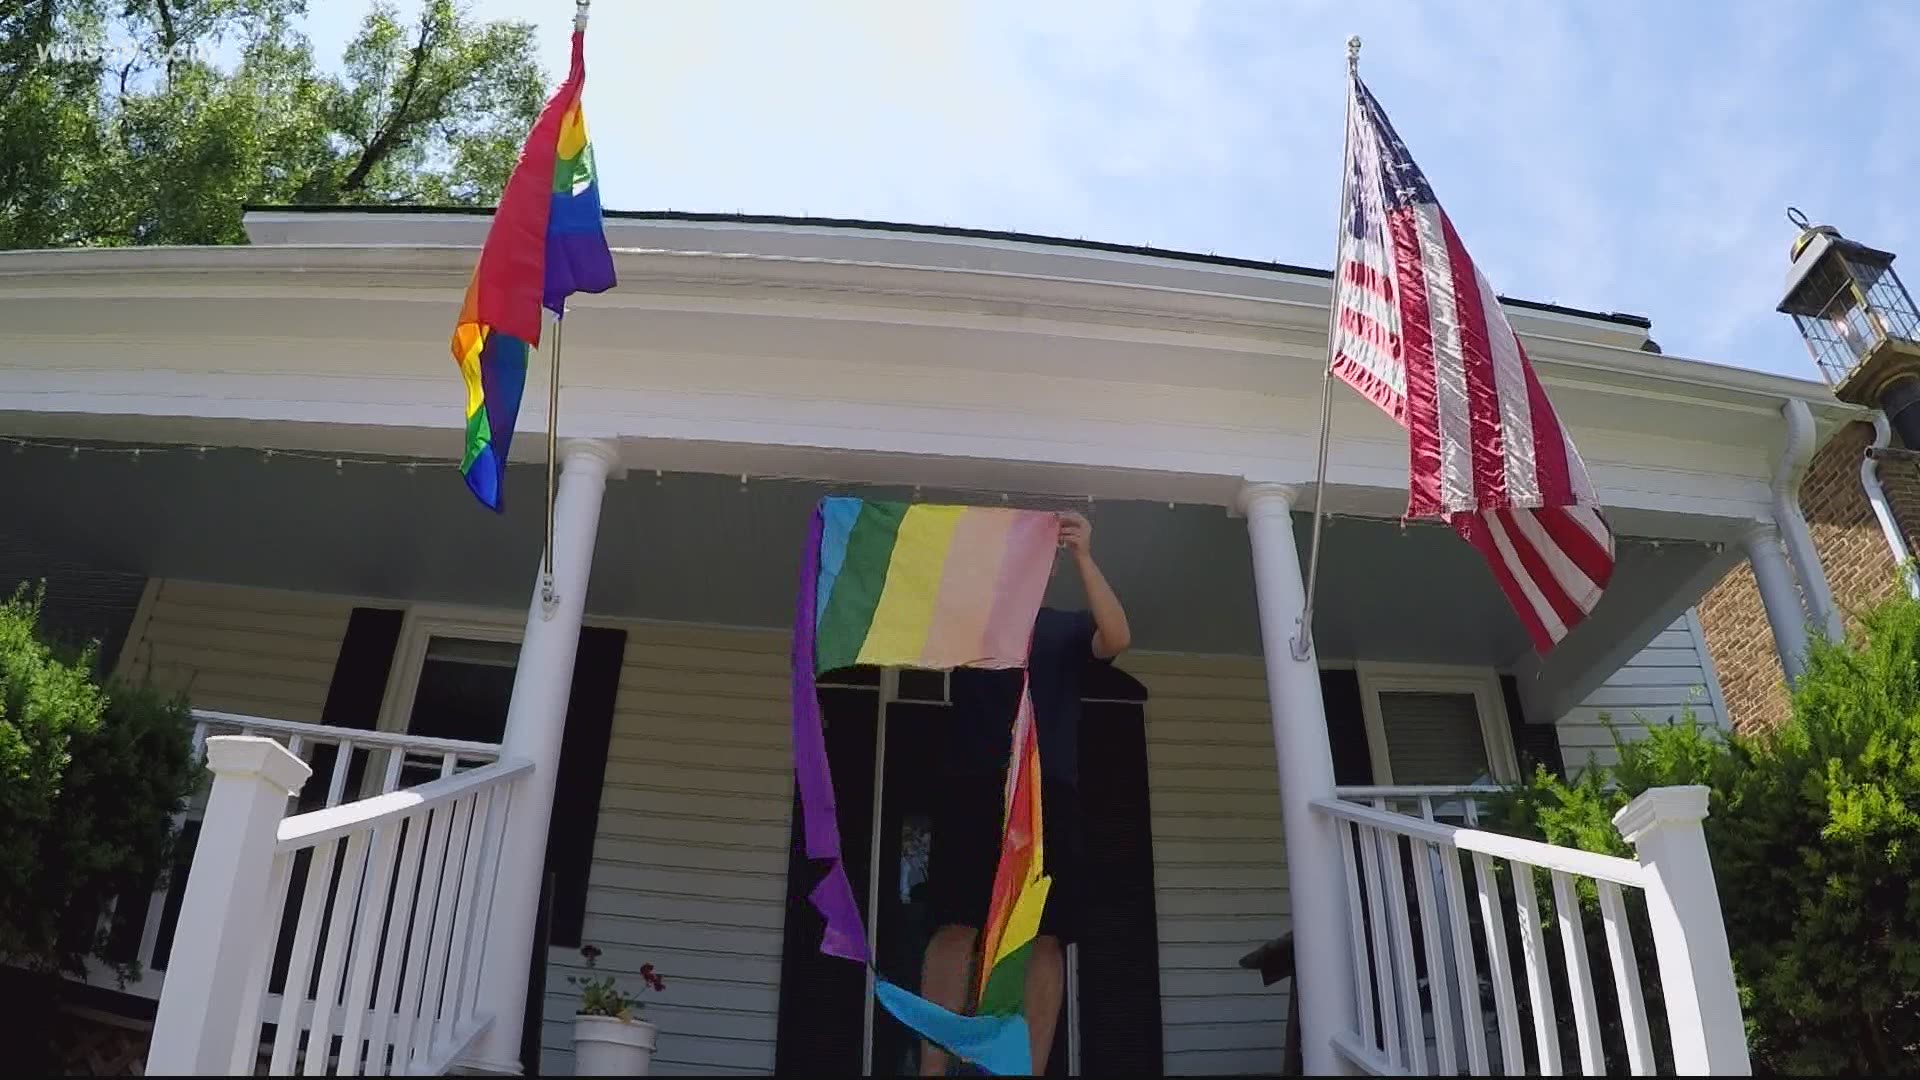 Victims of theft and vandalism of Pride flags in Lovettsville, Virginia say the town is trying to turn hate into love.